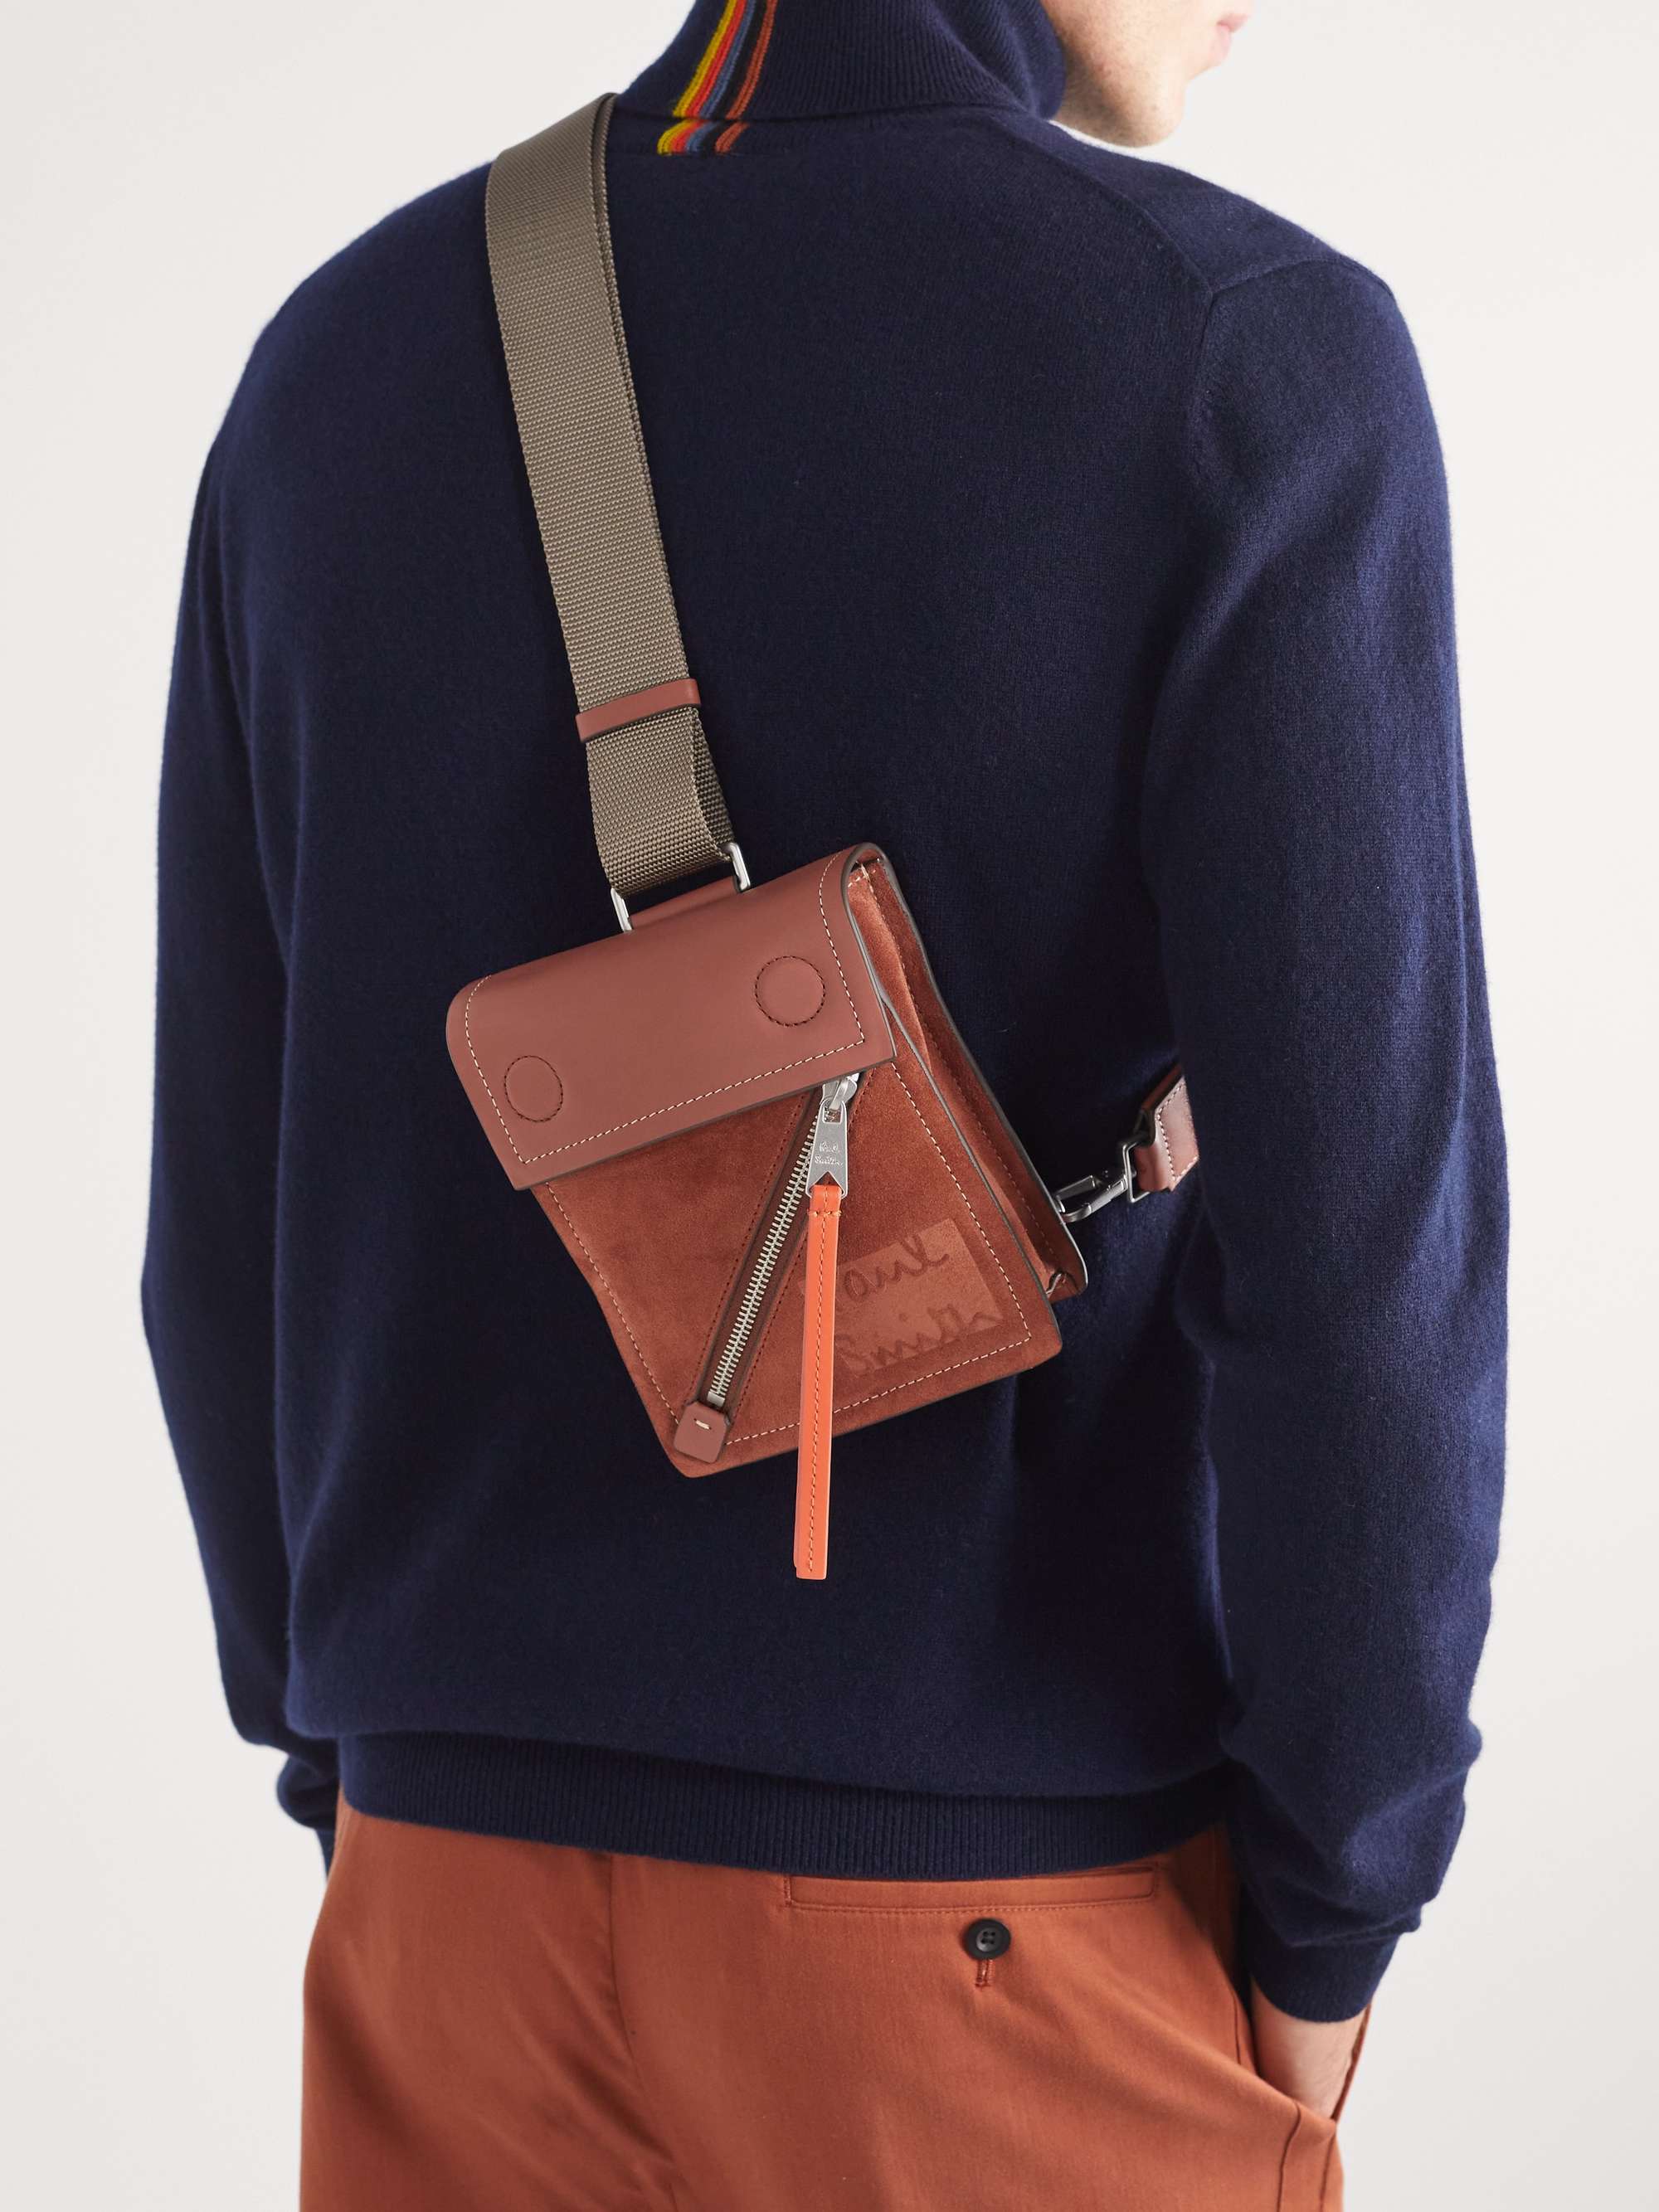 PAUL SMITH Leather and Suede Messenger Bag | MR PORTER